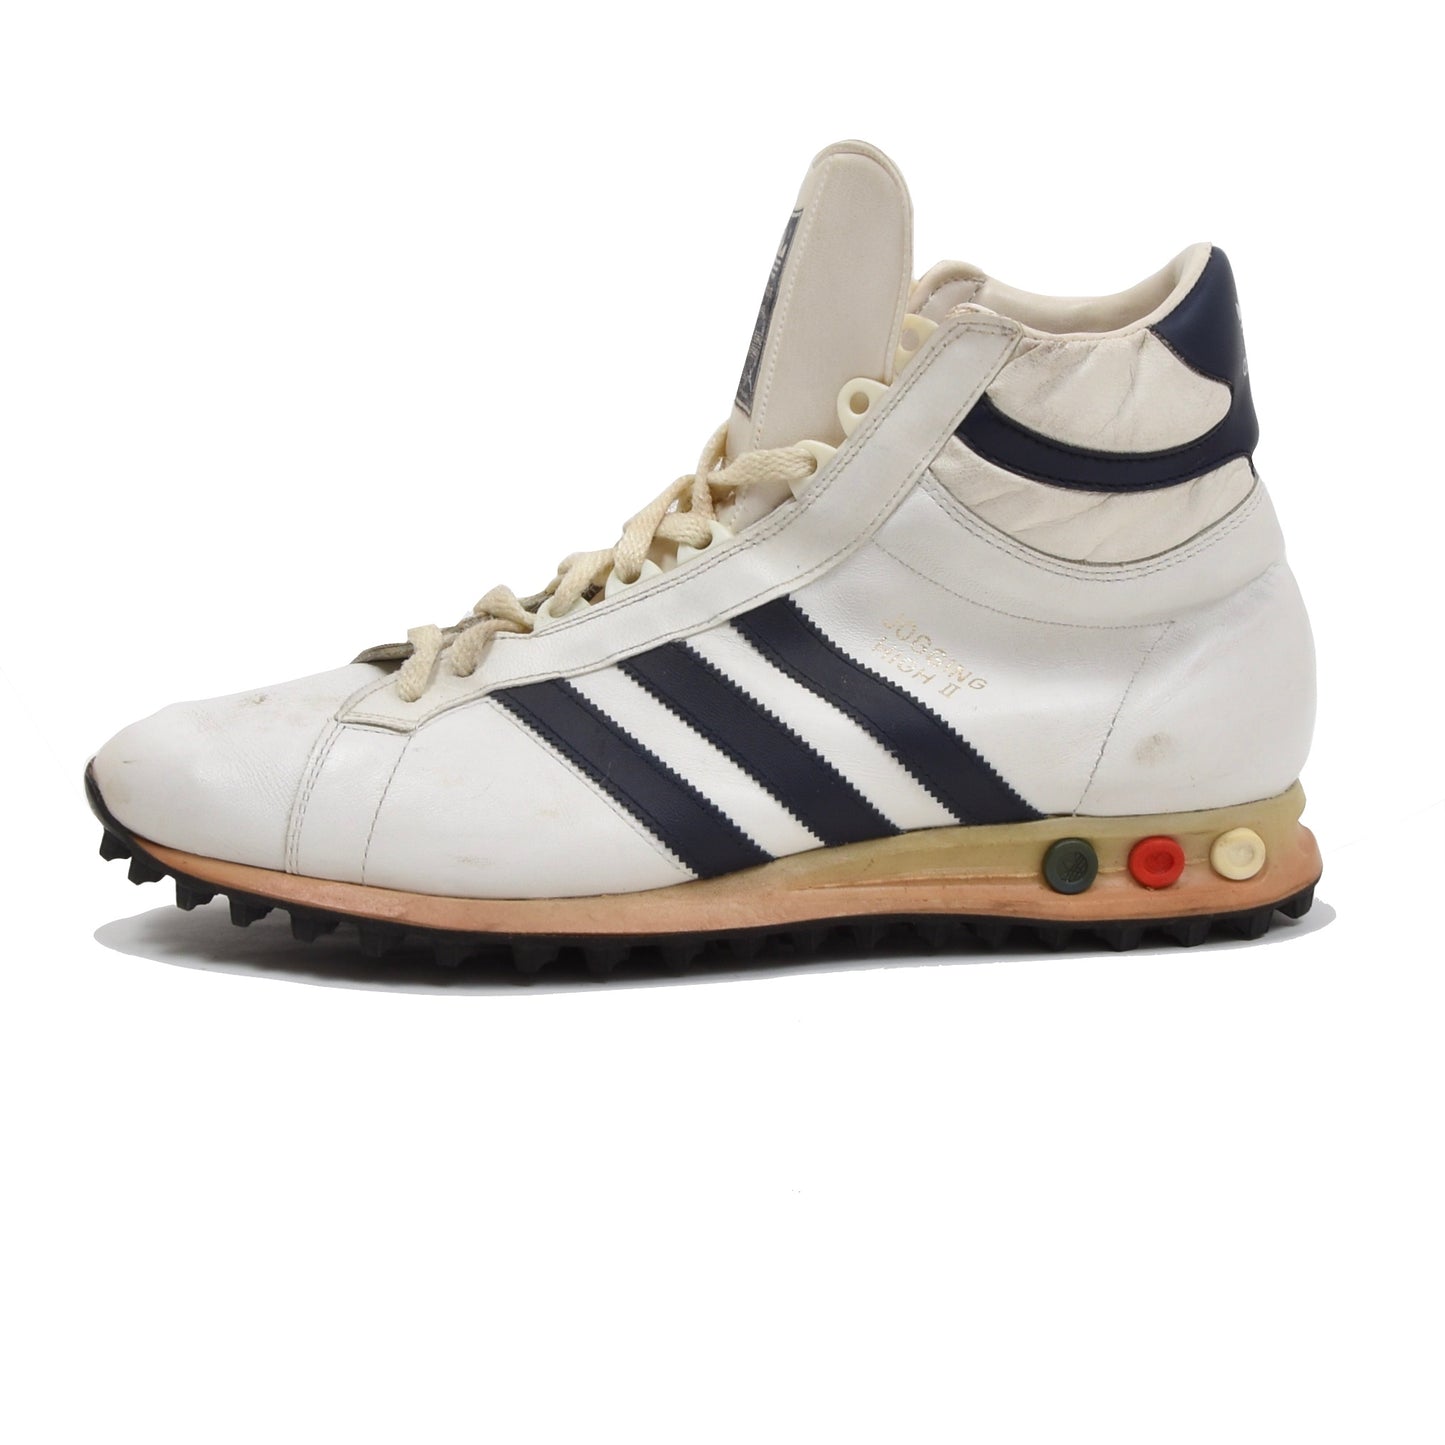 Vintage Adidas Jogging High Sneakers Size 9 - White/Navy